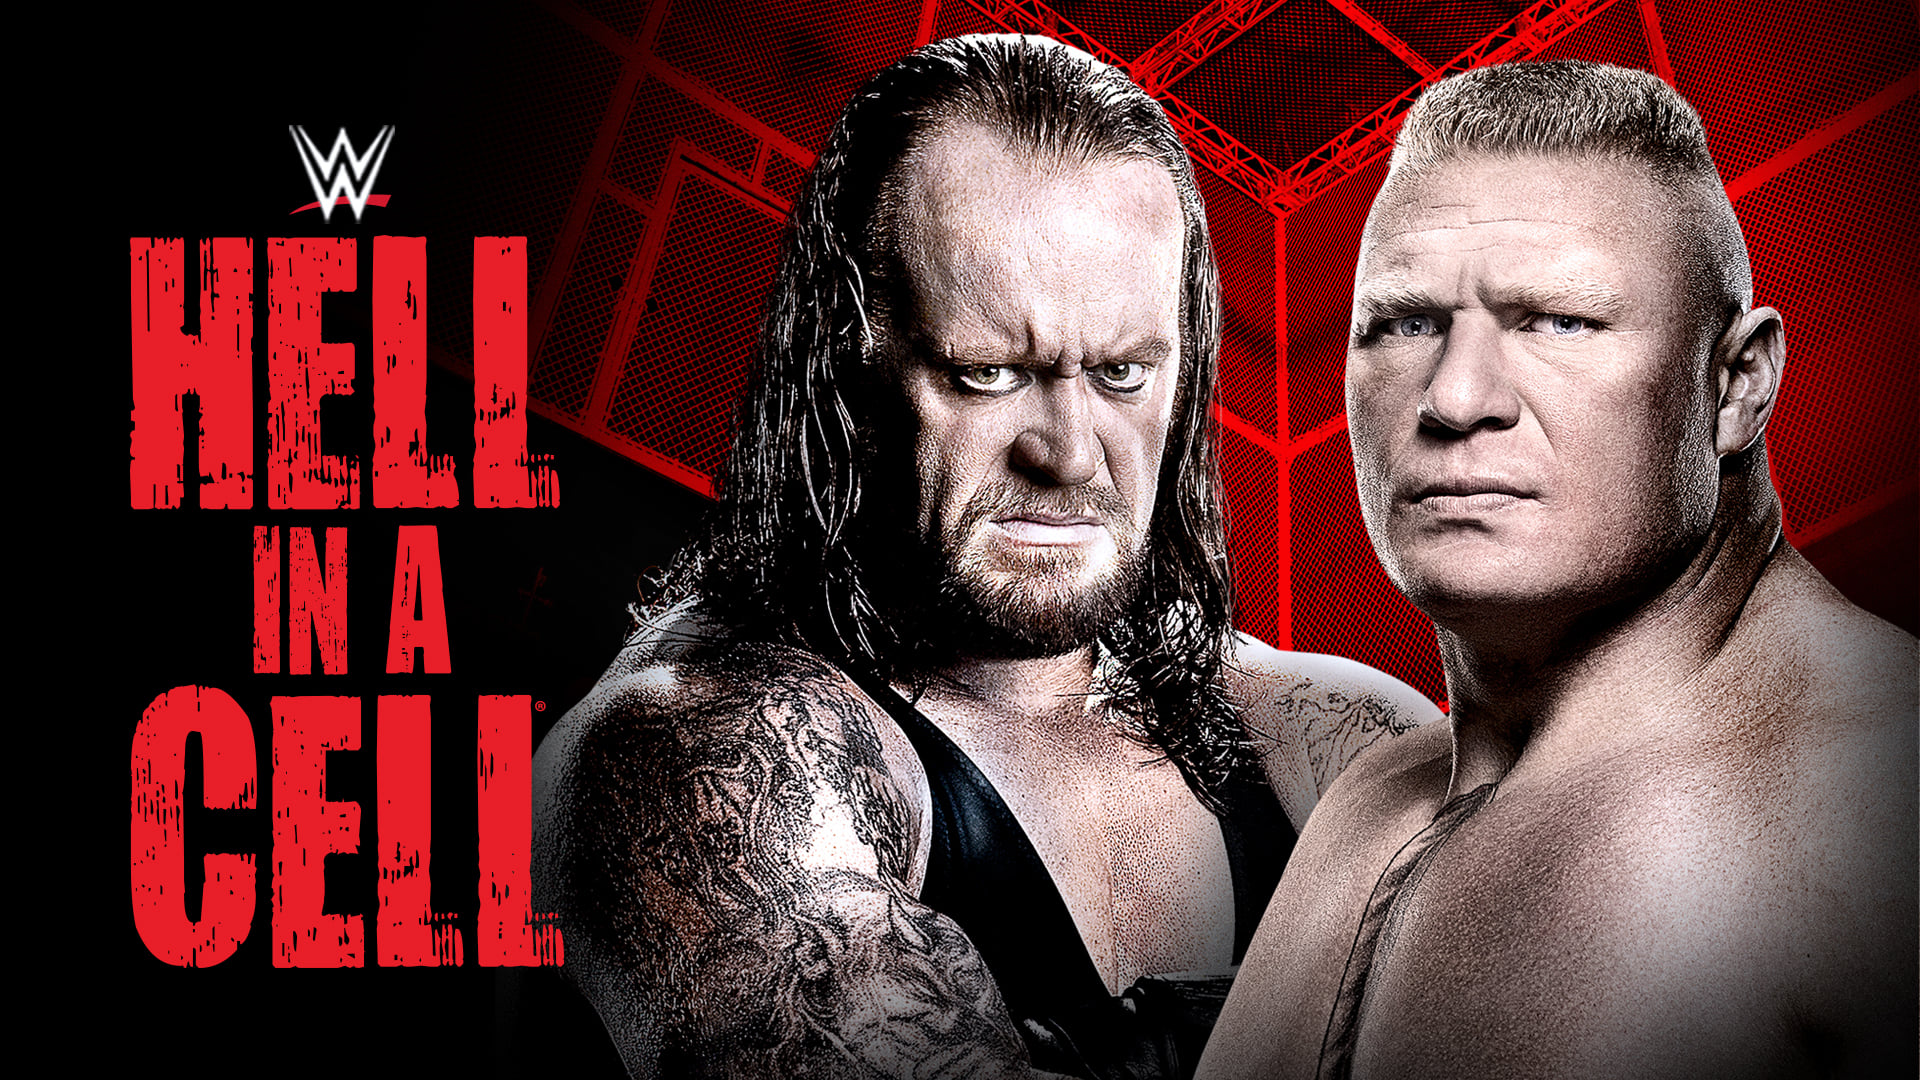 WWE Hell In A Cell Results - Oct 25, 2015 - Undertaker vs. Lesnar.